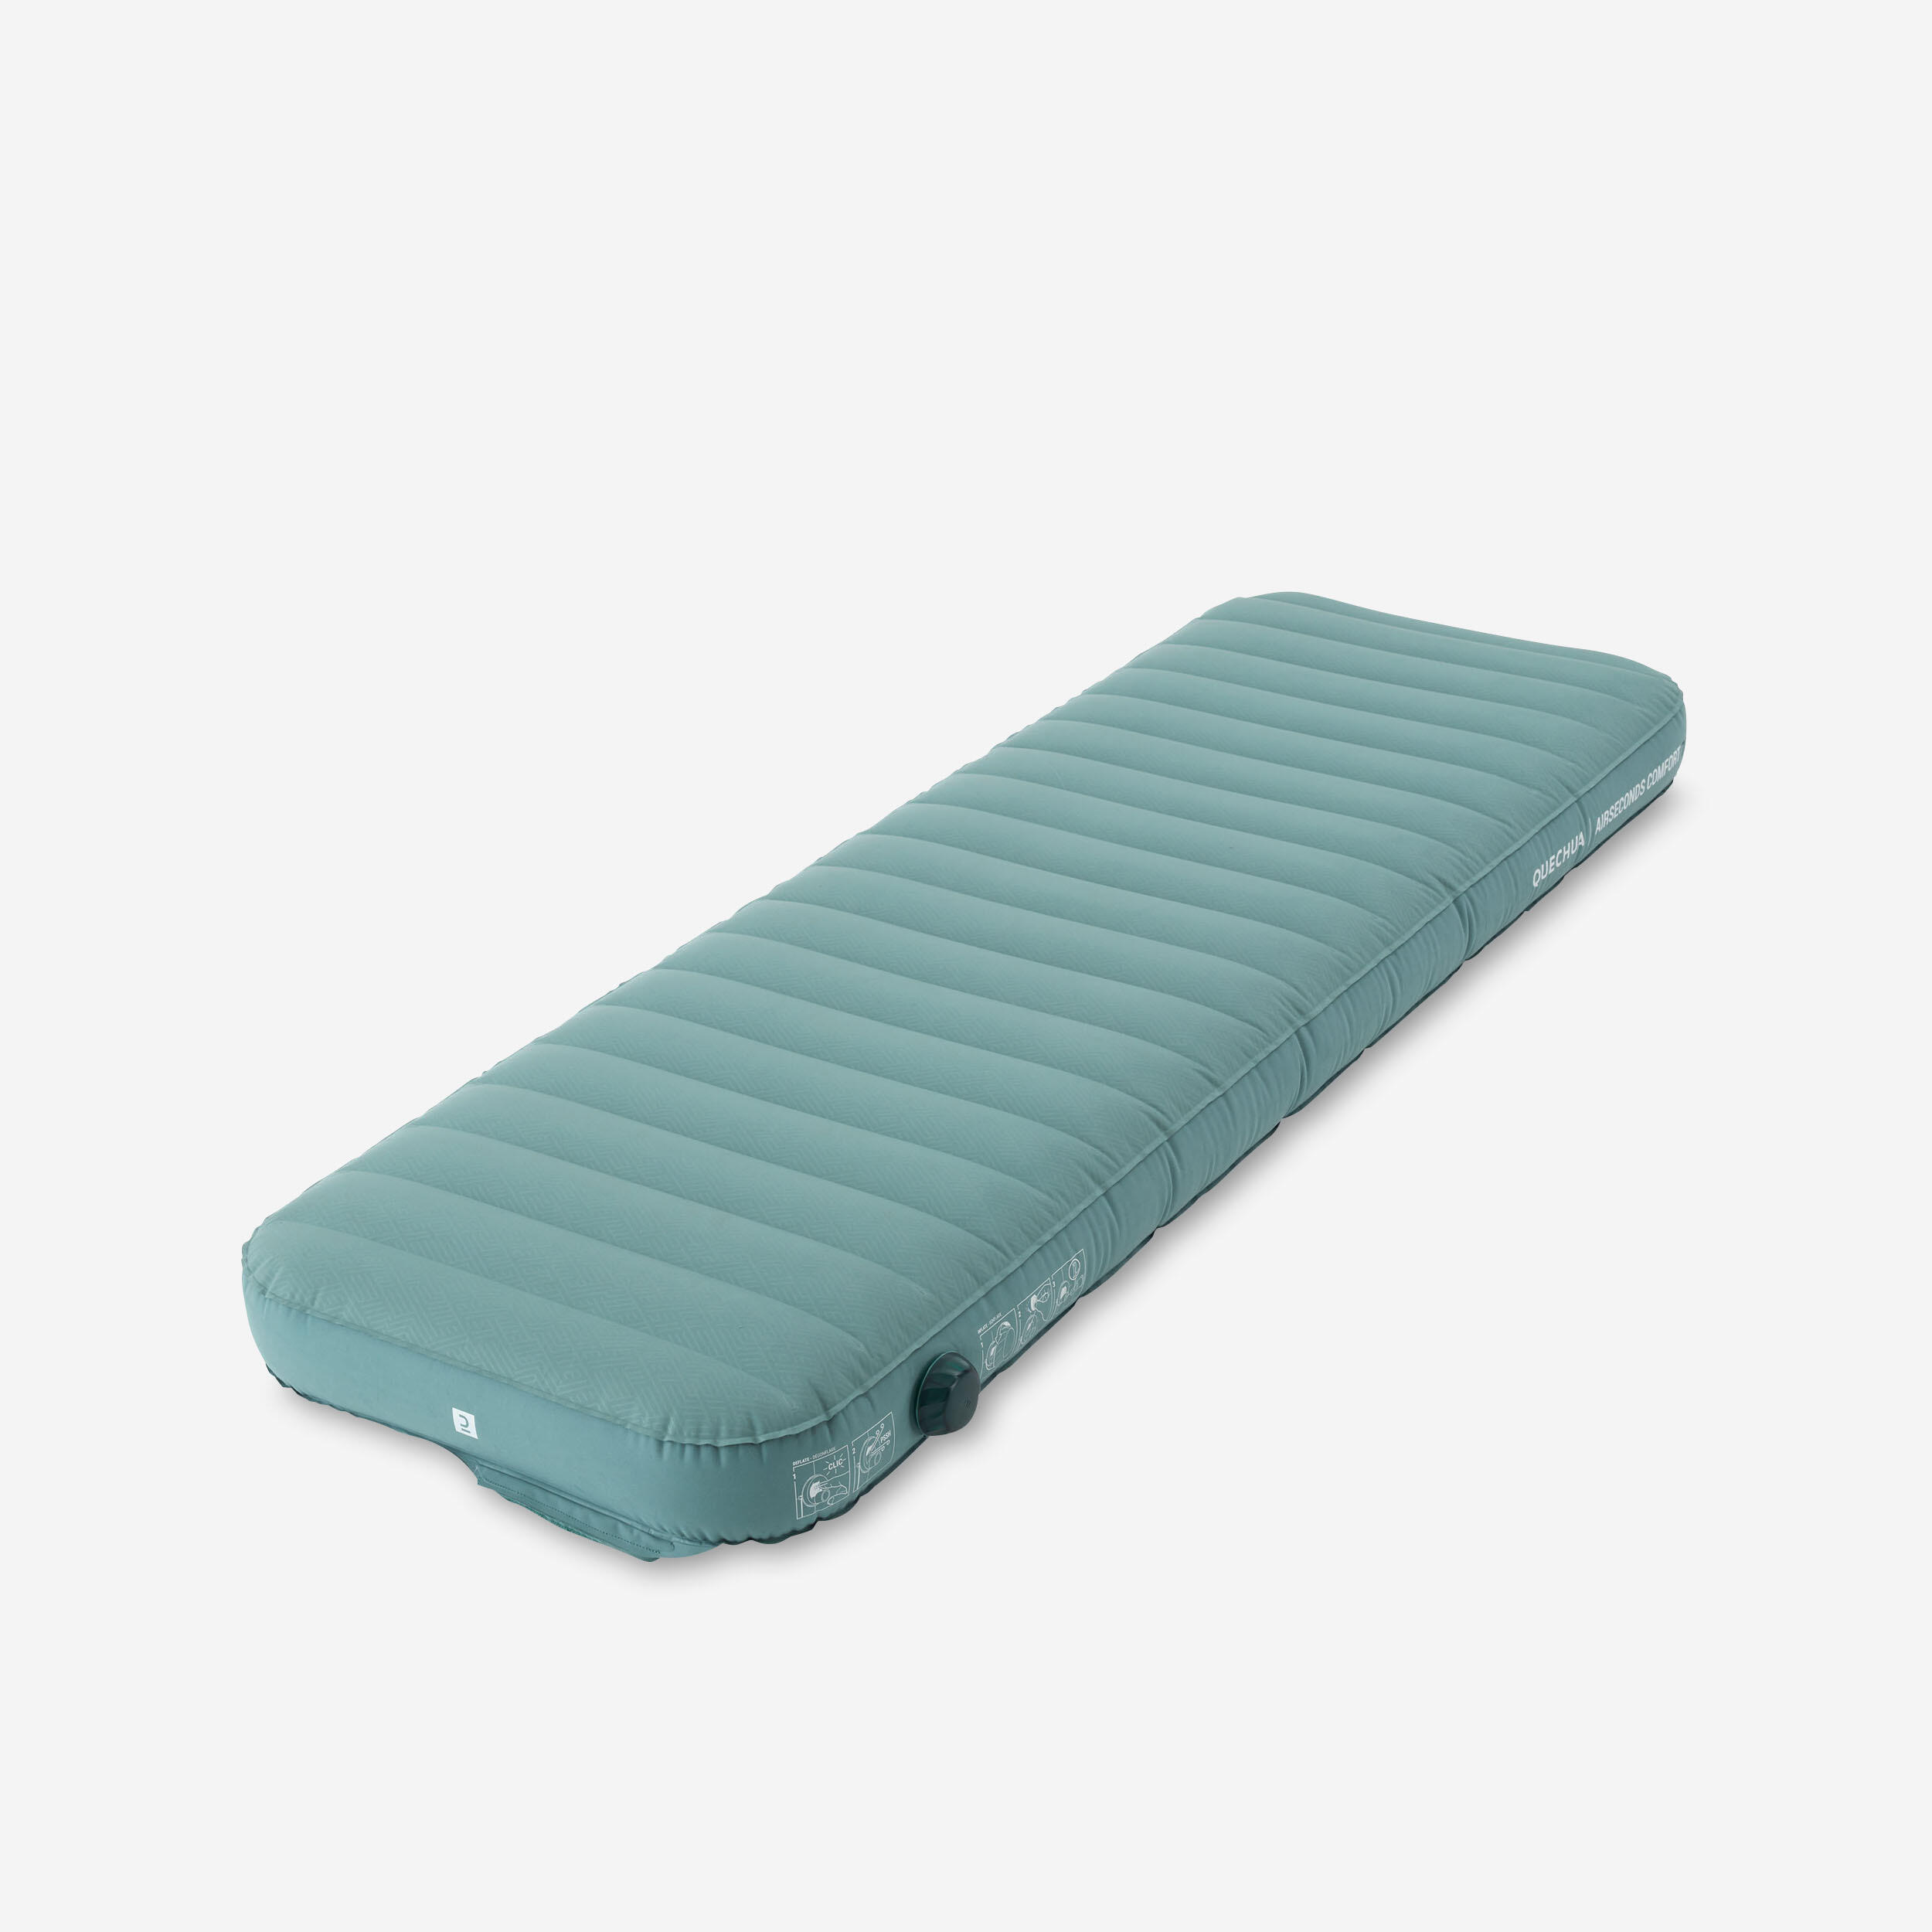 INFLATABLE CAMPING MATTRESS - AIR SECONDS COMFORT 70 CM - 1 PERSON 1/9